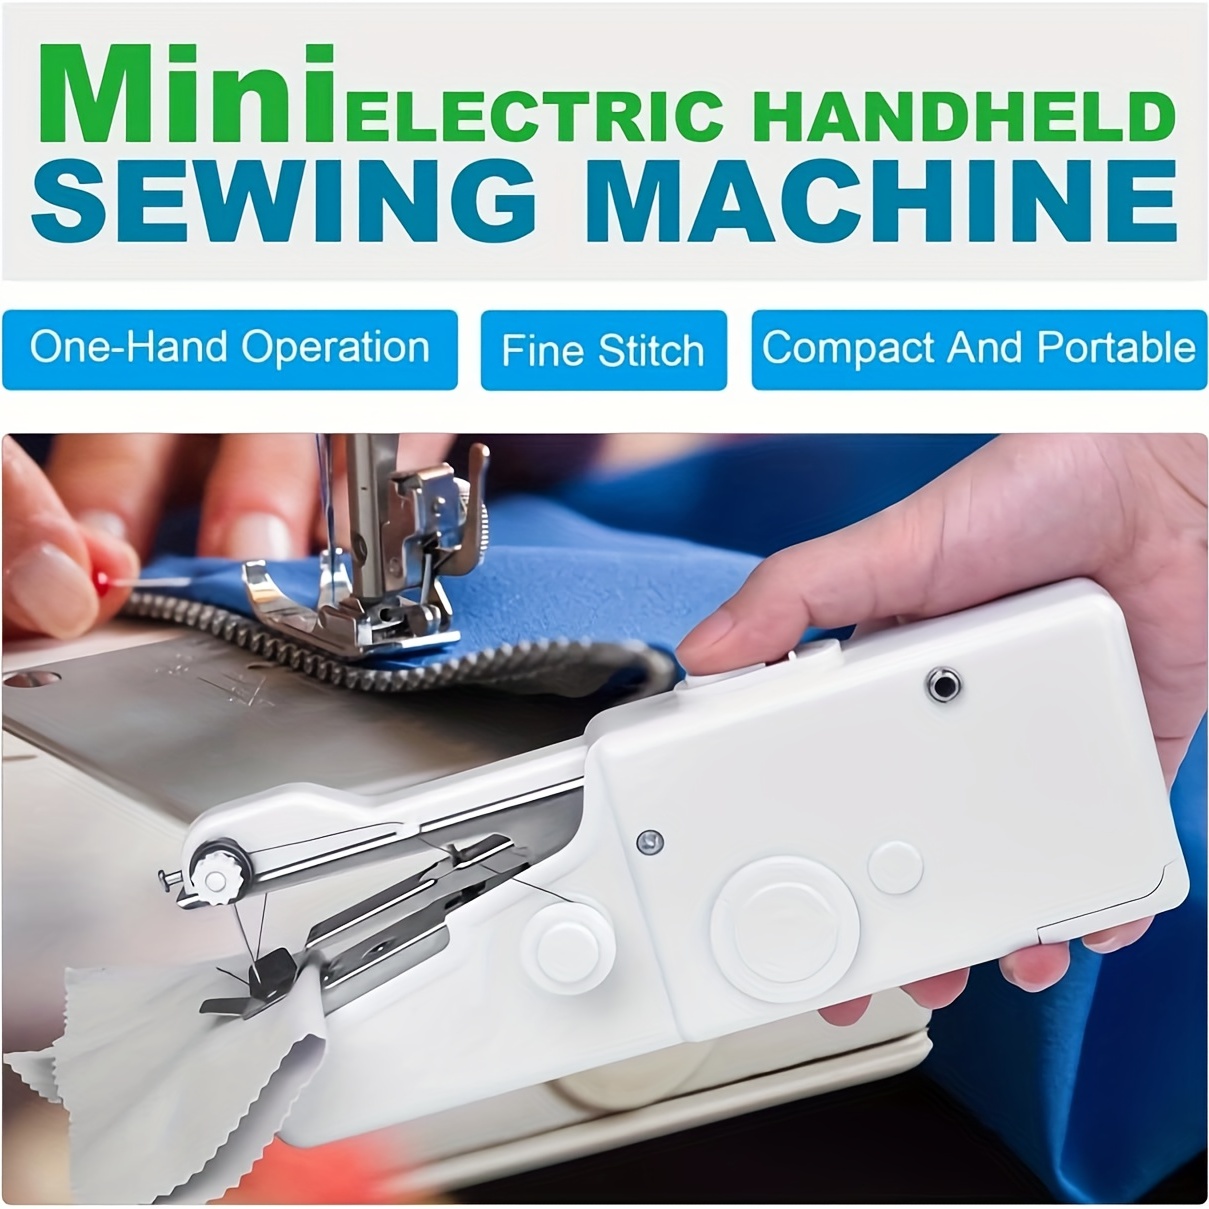 Portable Handheld Sewing Machine for Quick Stitching - Ideal for Fabric,  Clothing, and DIY Projects - Perfect for Home and Travel Use